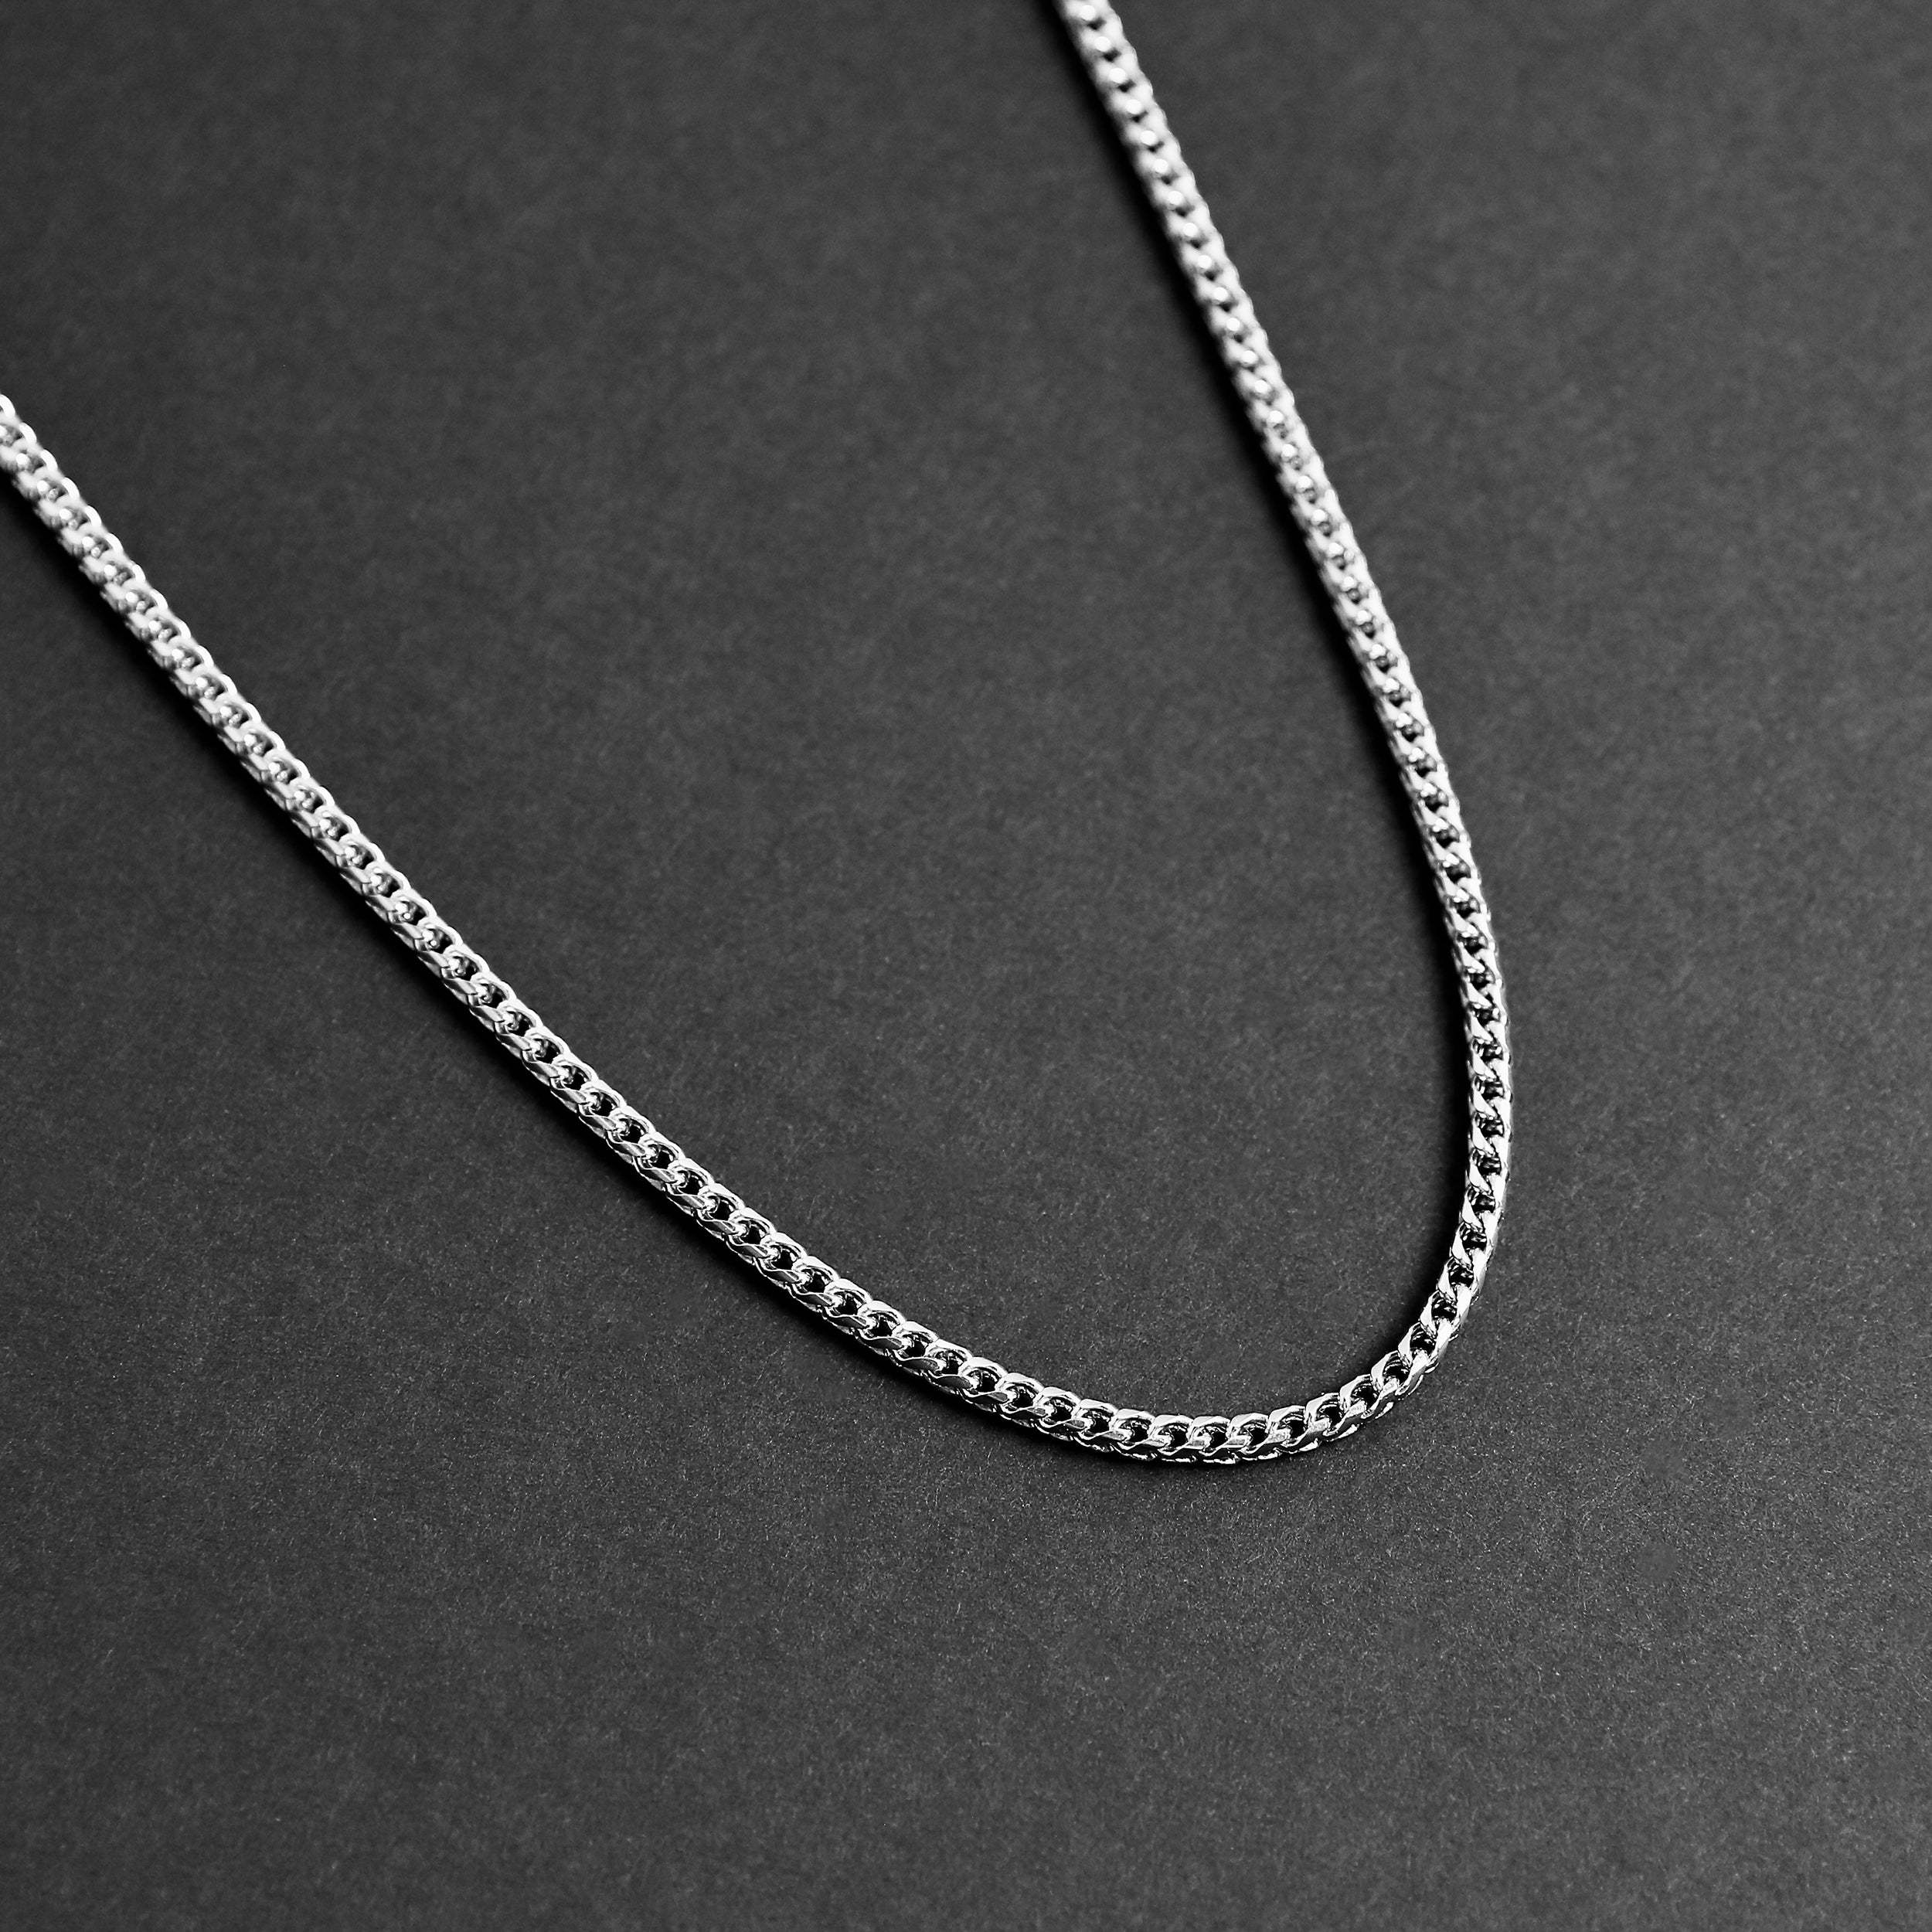 Franco Chain Necklace - Silver 3.5mm